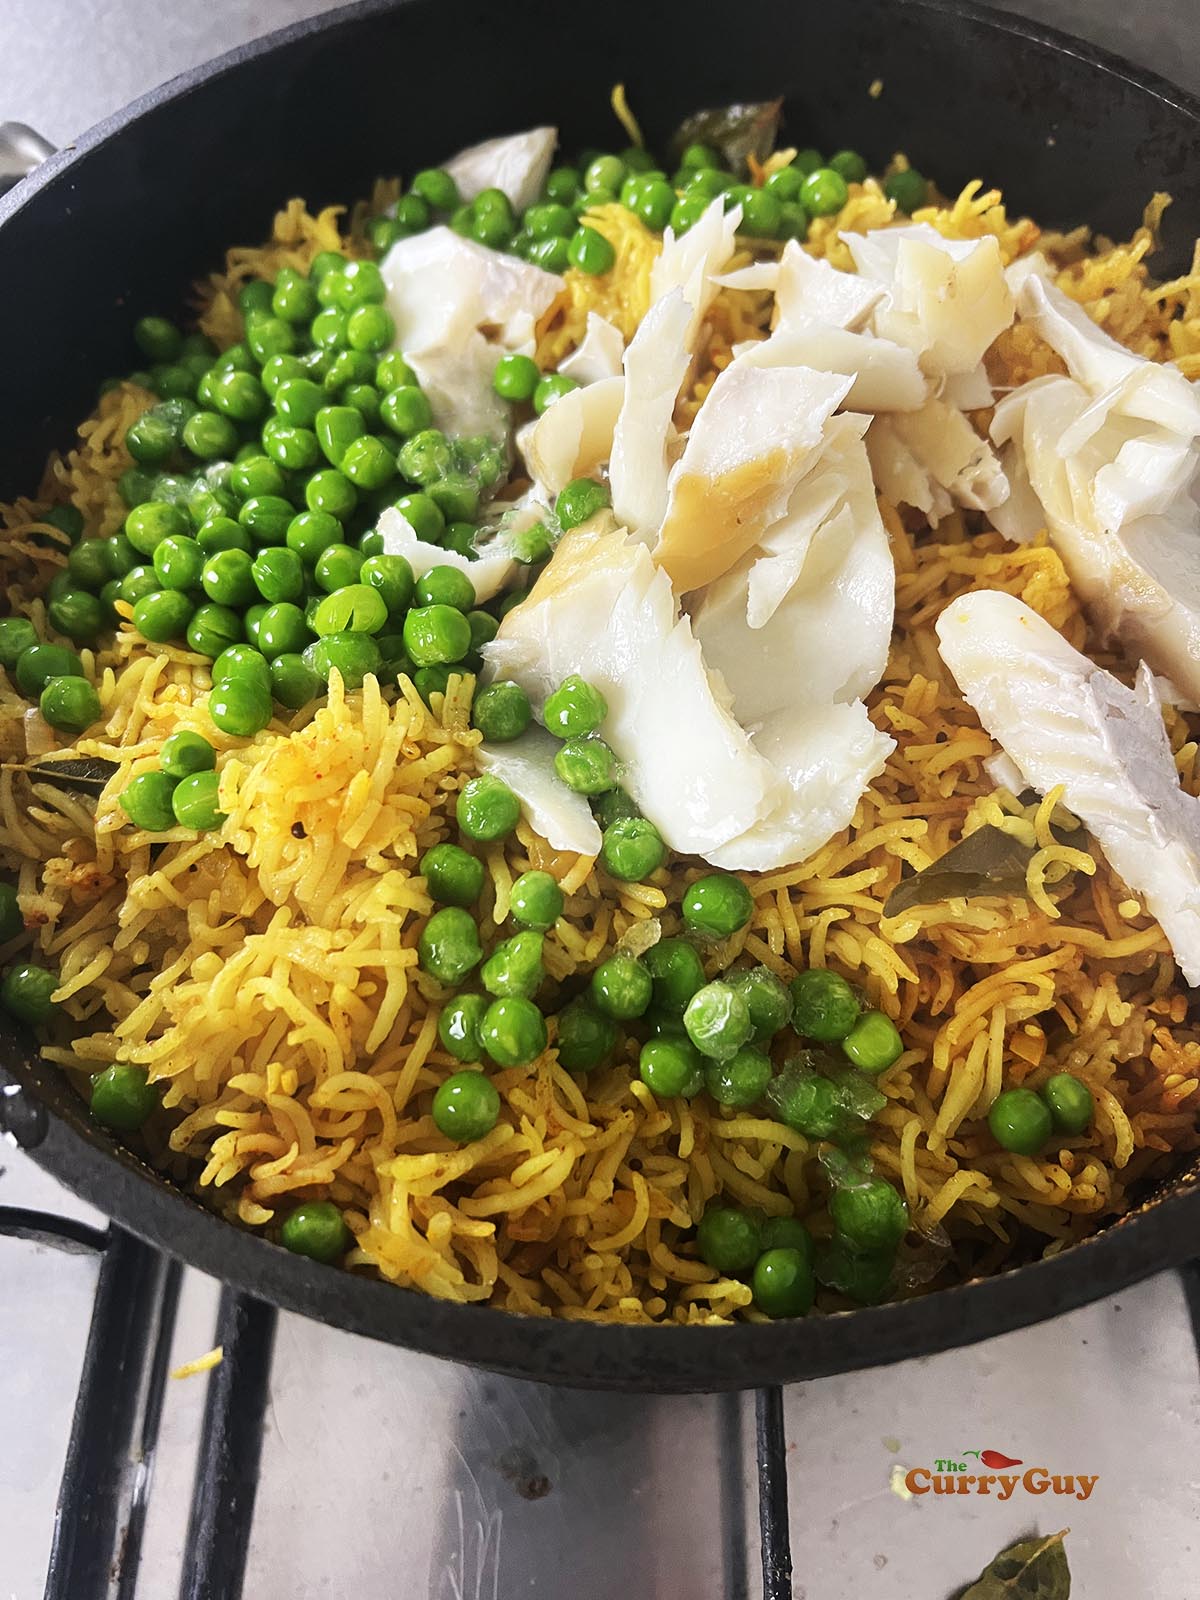 Adding the smoked haddock and peas to the rice.